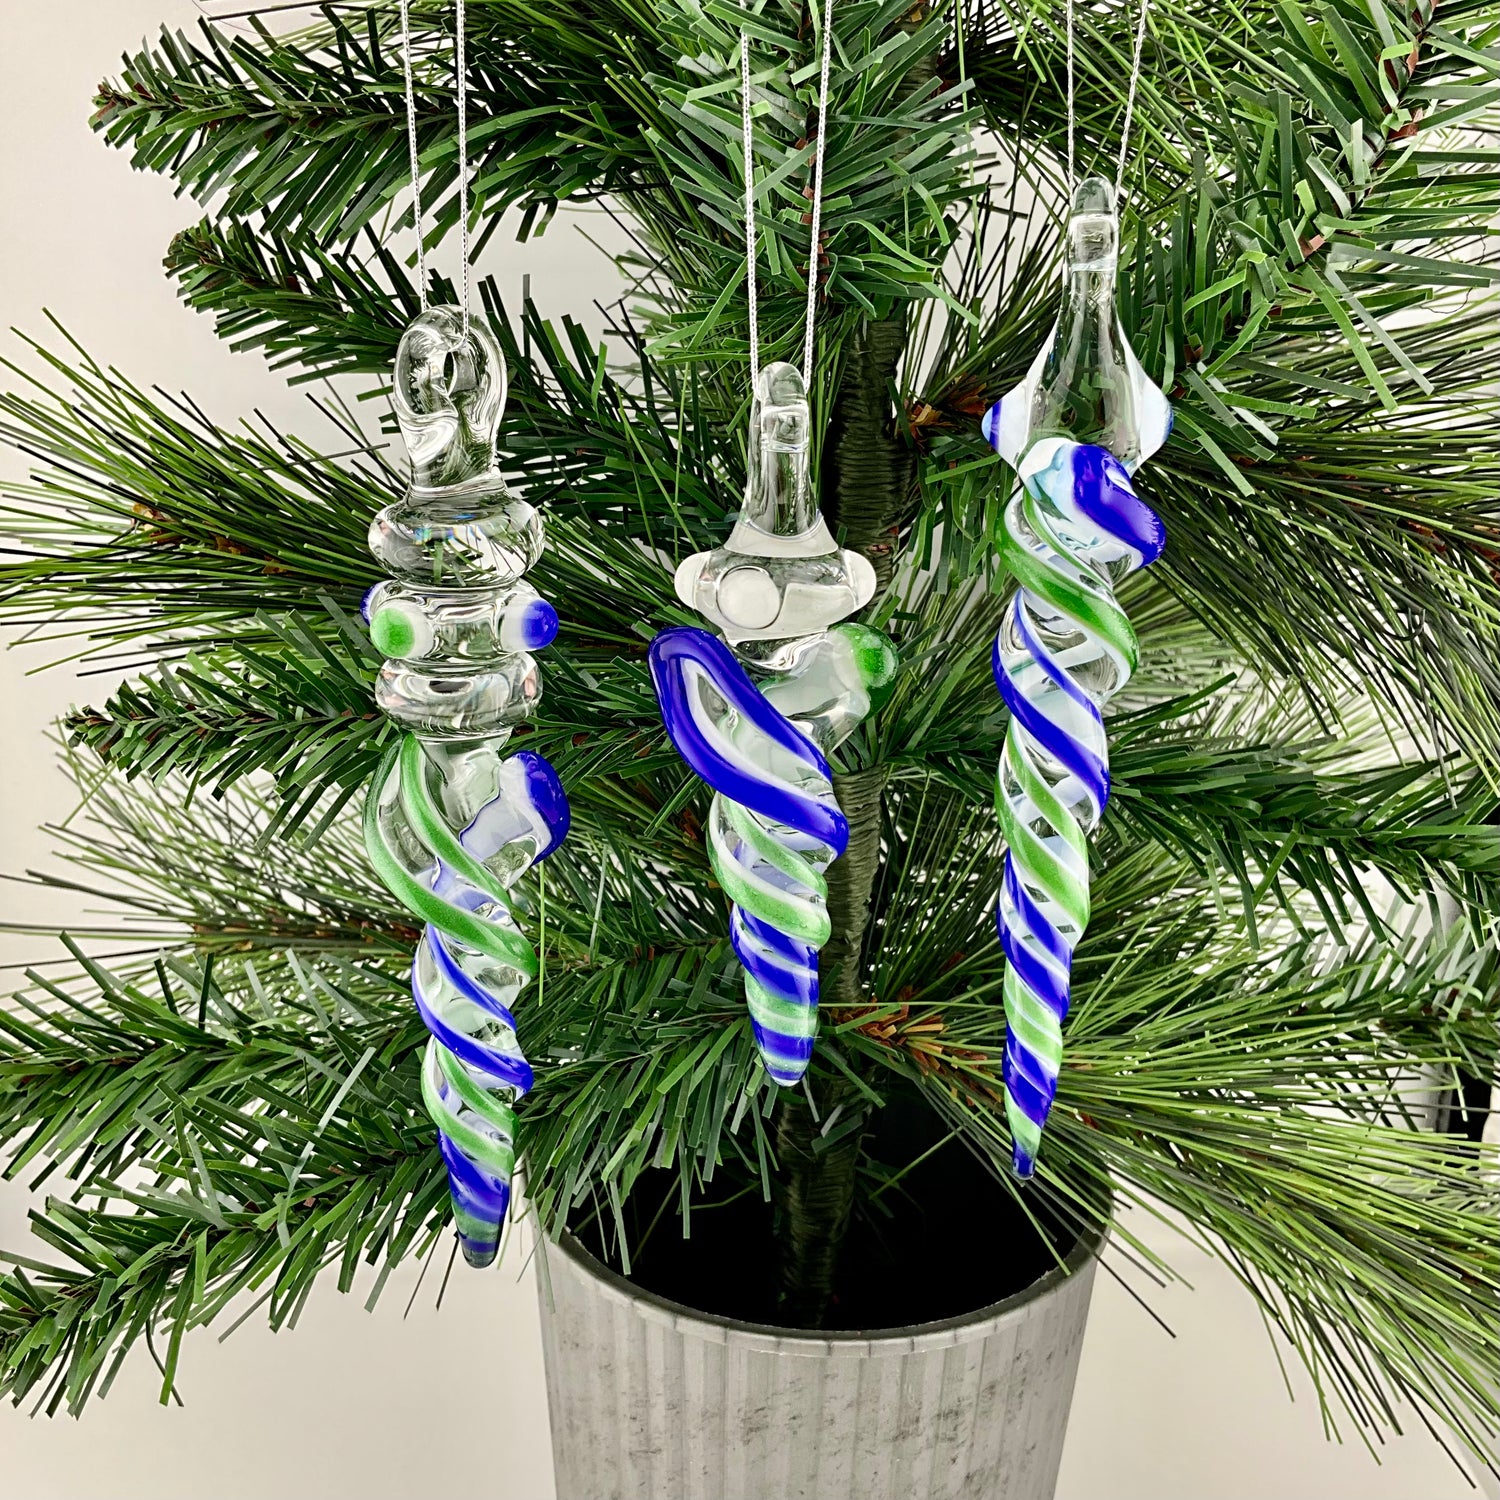 3 Pack Colored Glass Icicle Ornaments